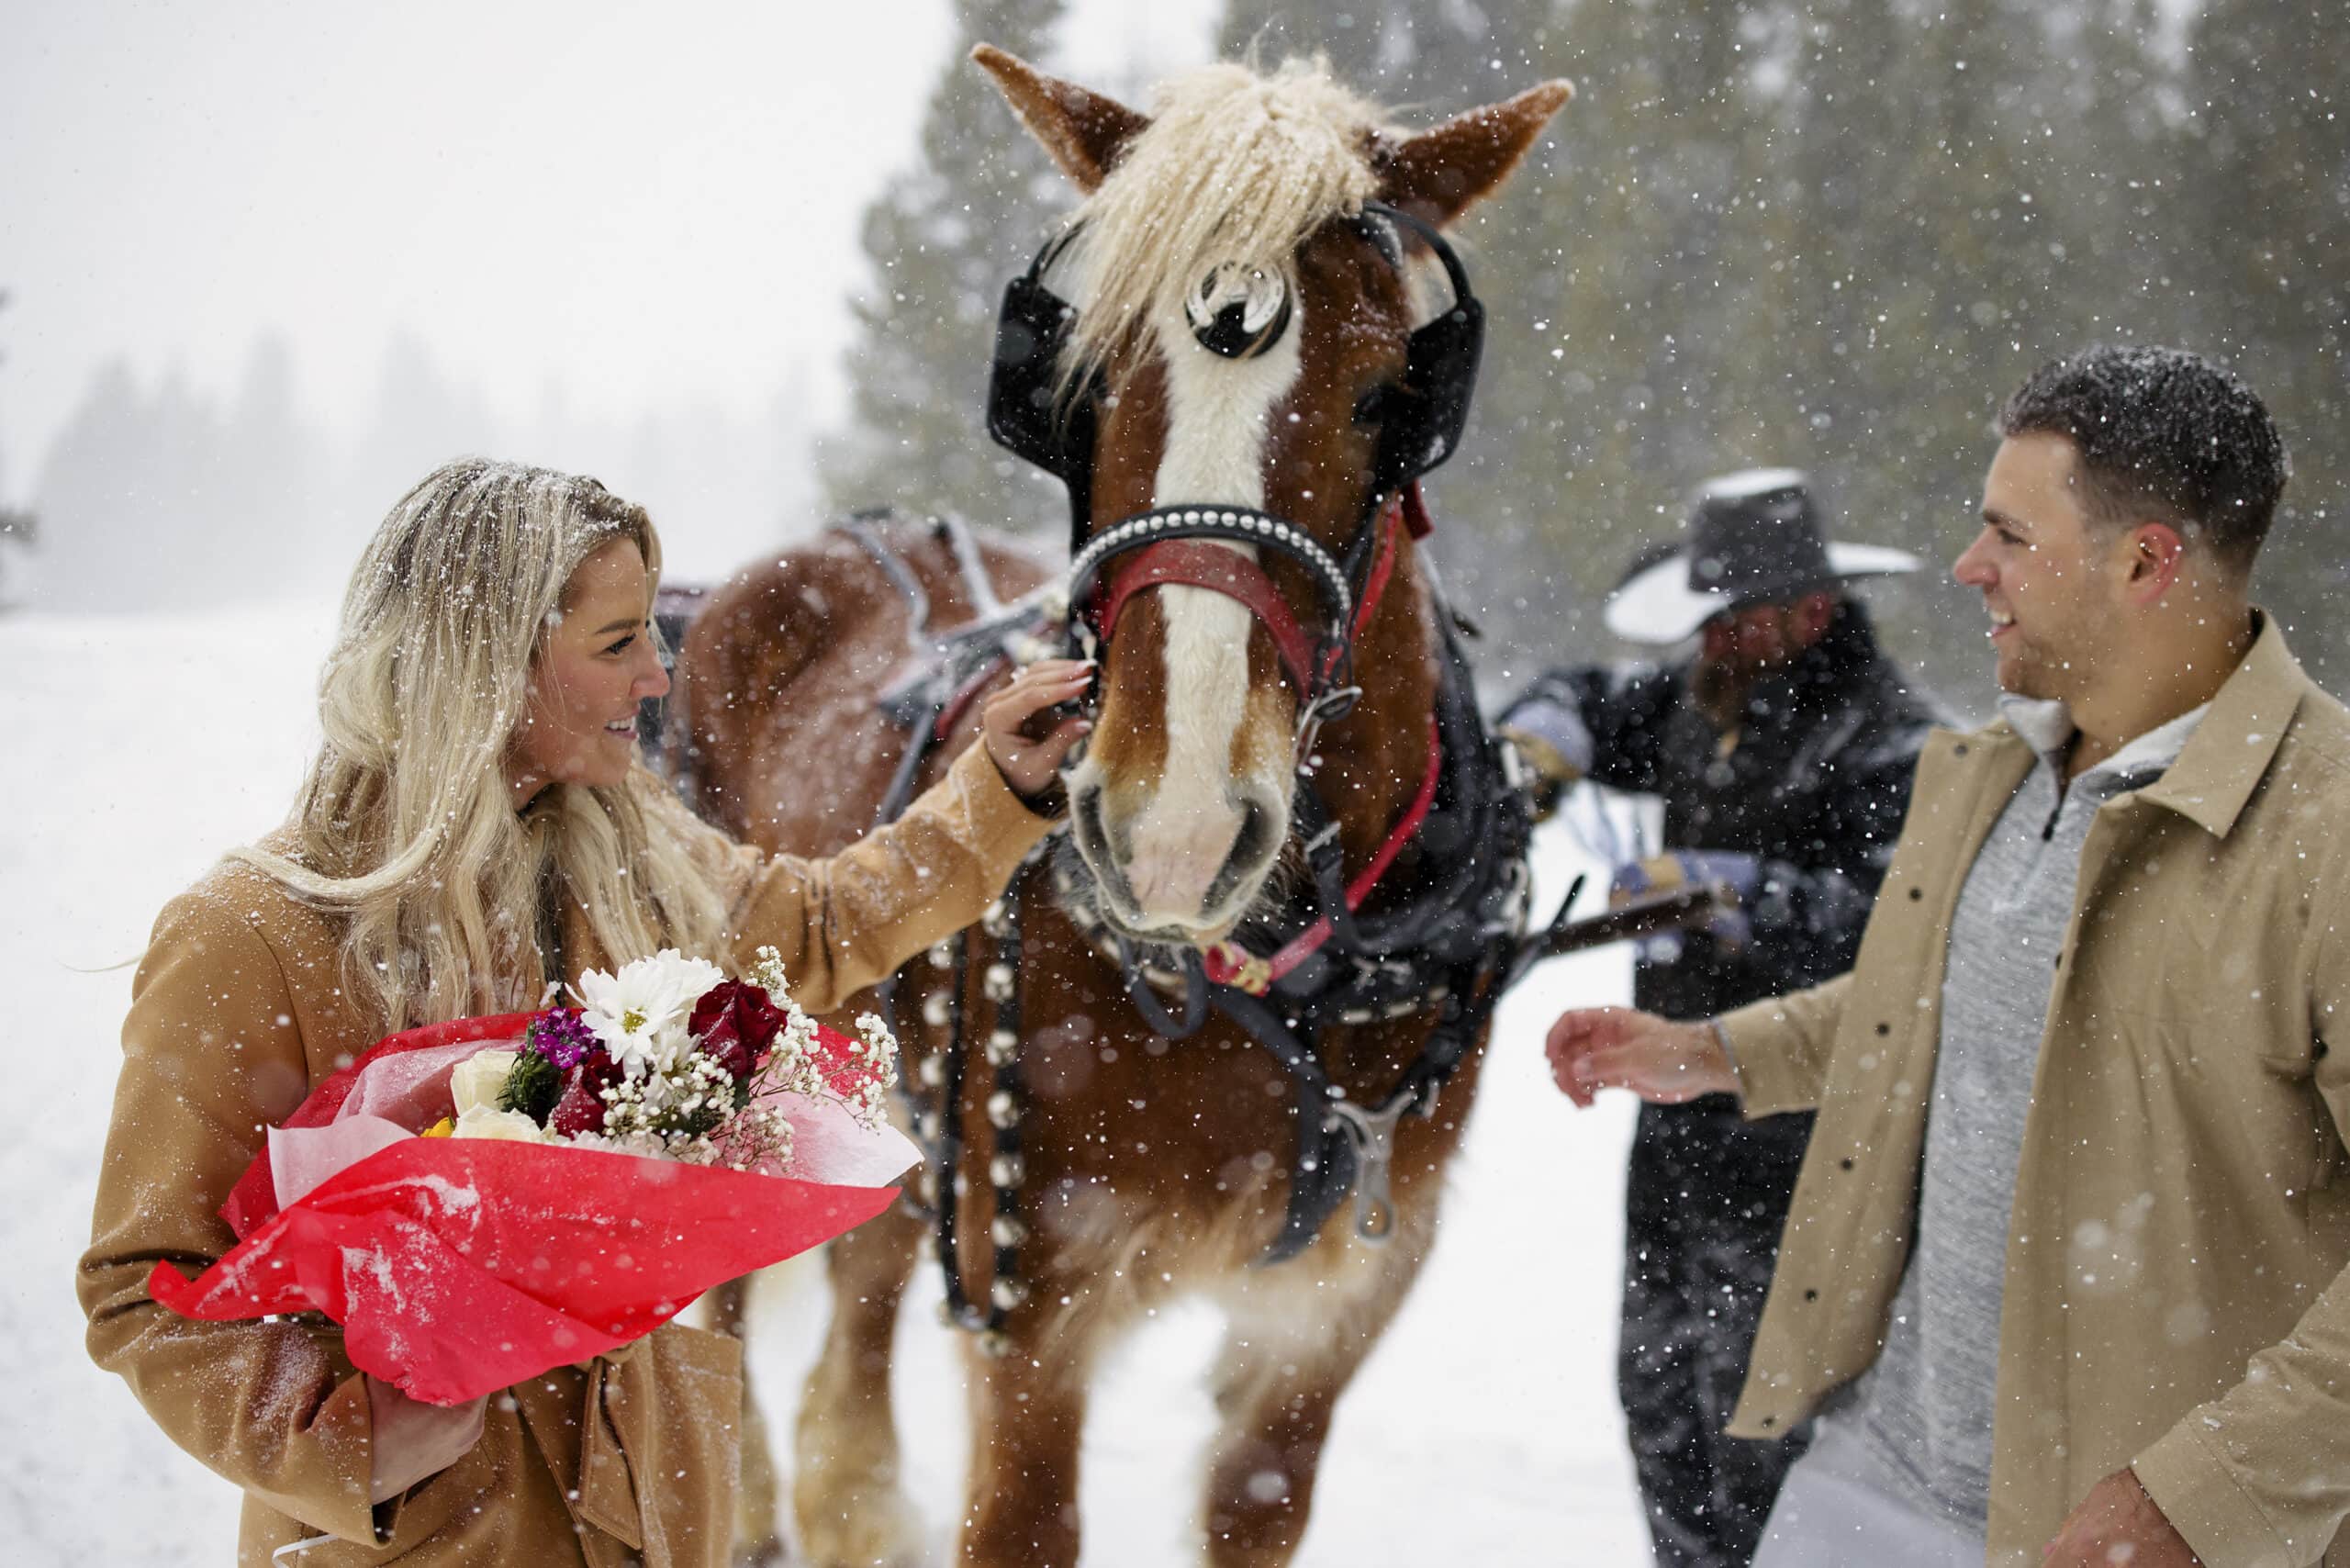 A newly engaged couple checks out a horse during their sleigh ride